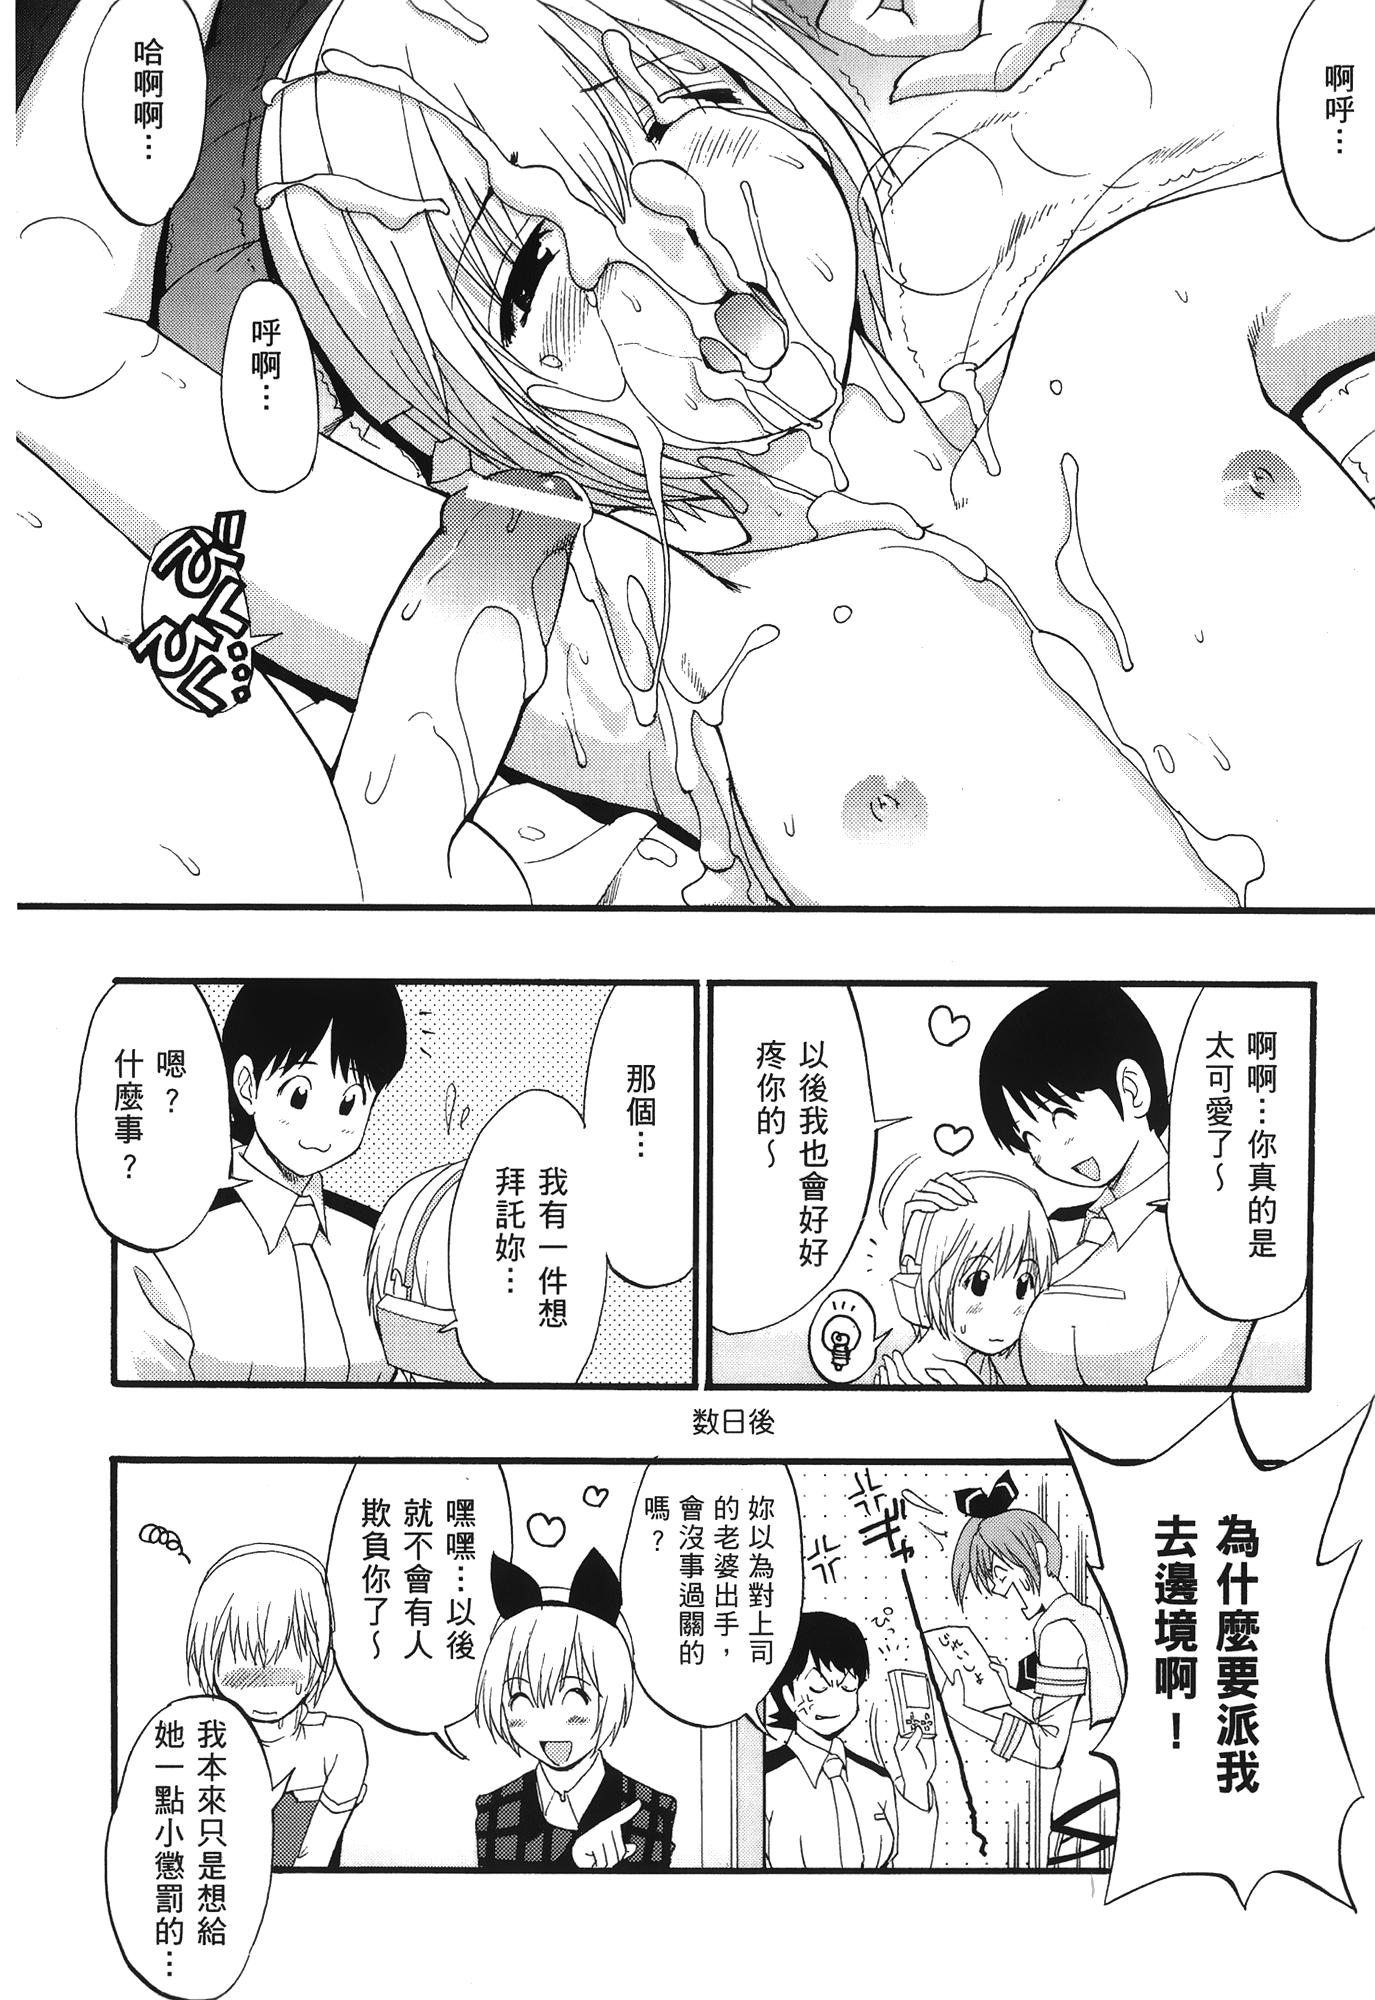 Porn [Saigado] THE YURI & FRIENDS 6 (King of Fighters) | 武鬥美少女 [Chinese] - King of fighters Hindi - Page 159